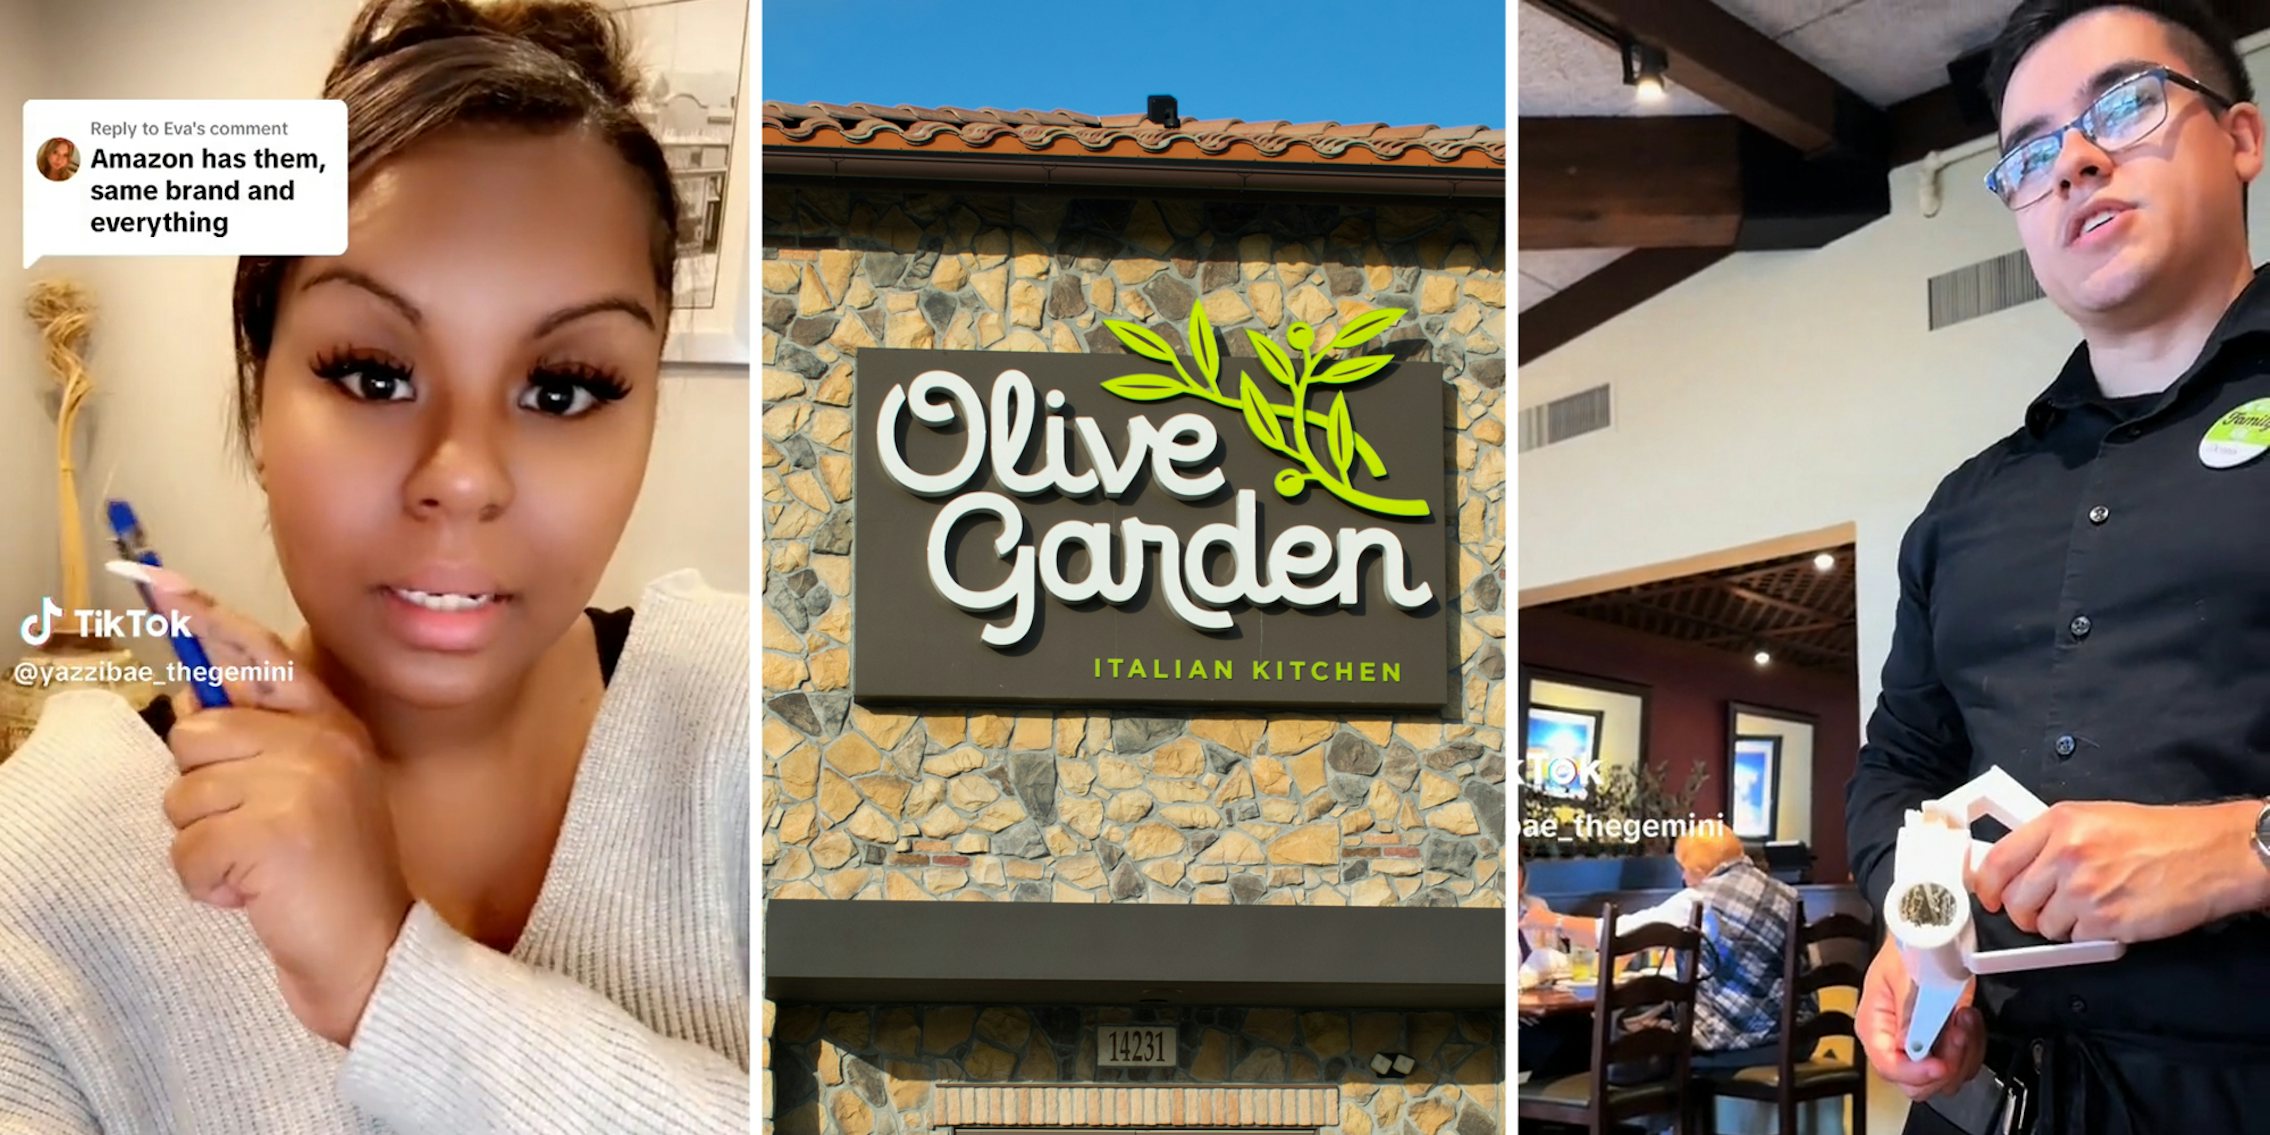 What kind of cheese grater do they use at Olive Garden? - Eating Expired